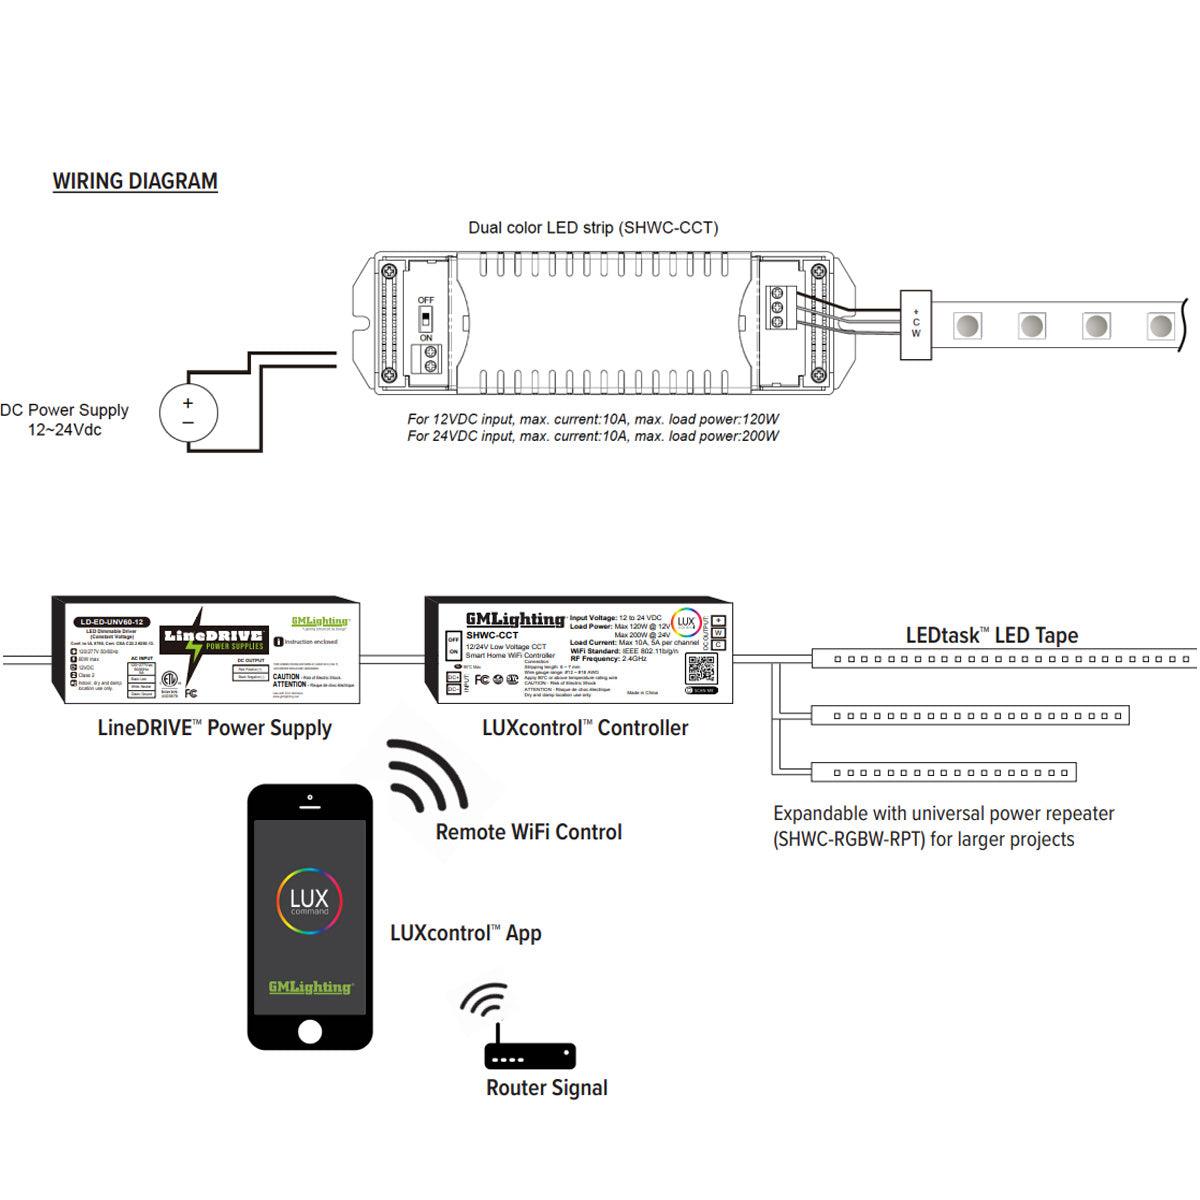 LUXcontrol LED Smart WiFi Controller, 2-Channel / 3-Wire, CCT 12V/24V Low Voltage, 5A - Bees Lighting